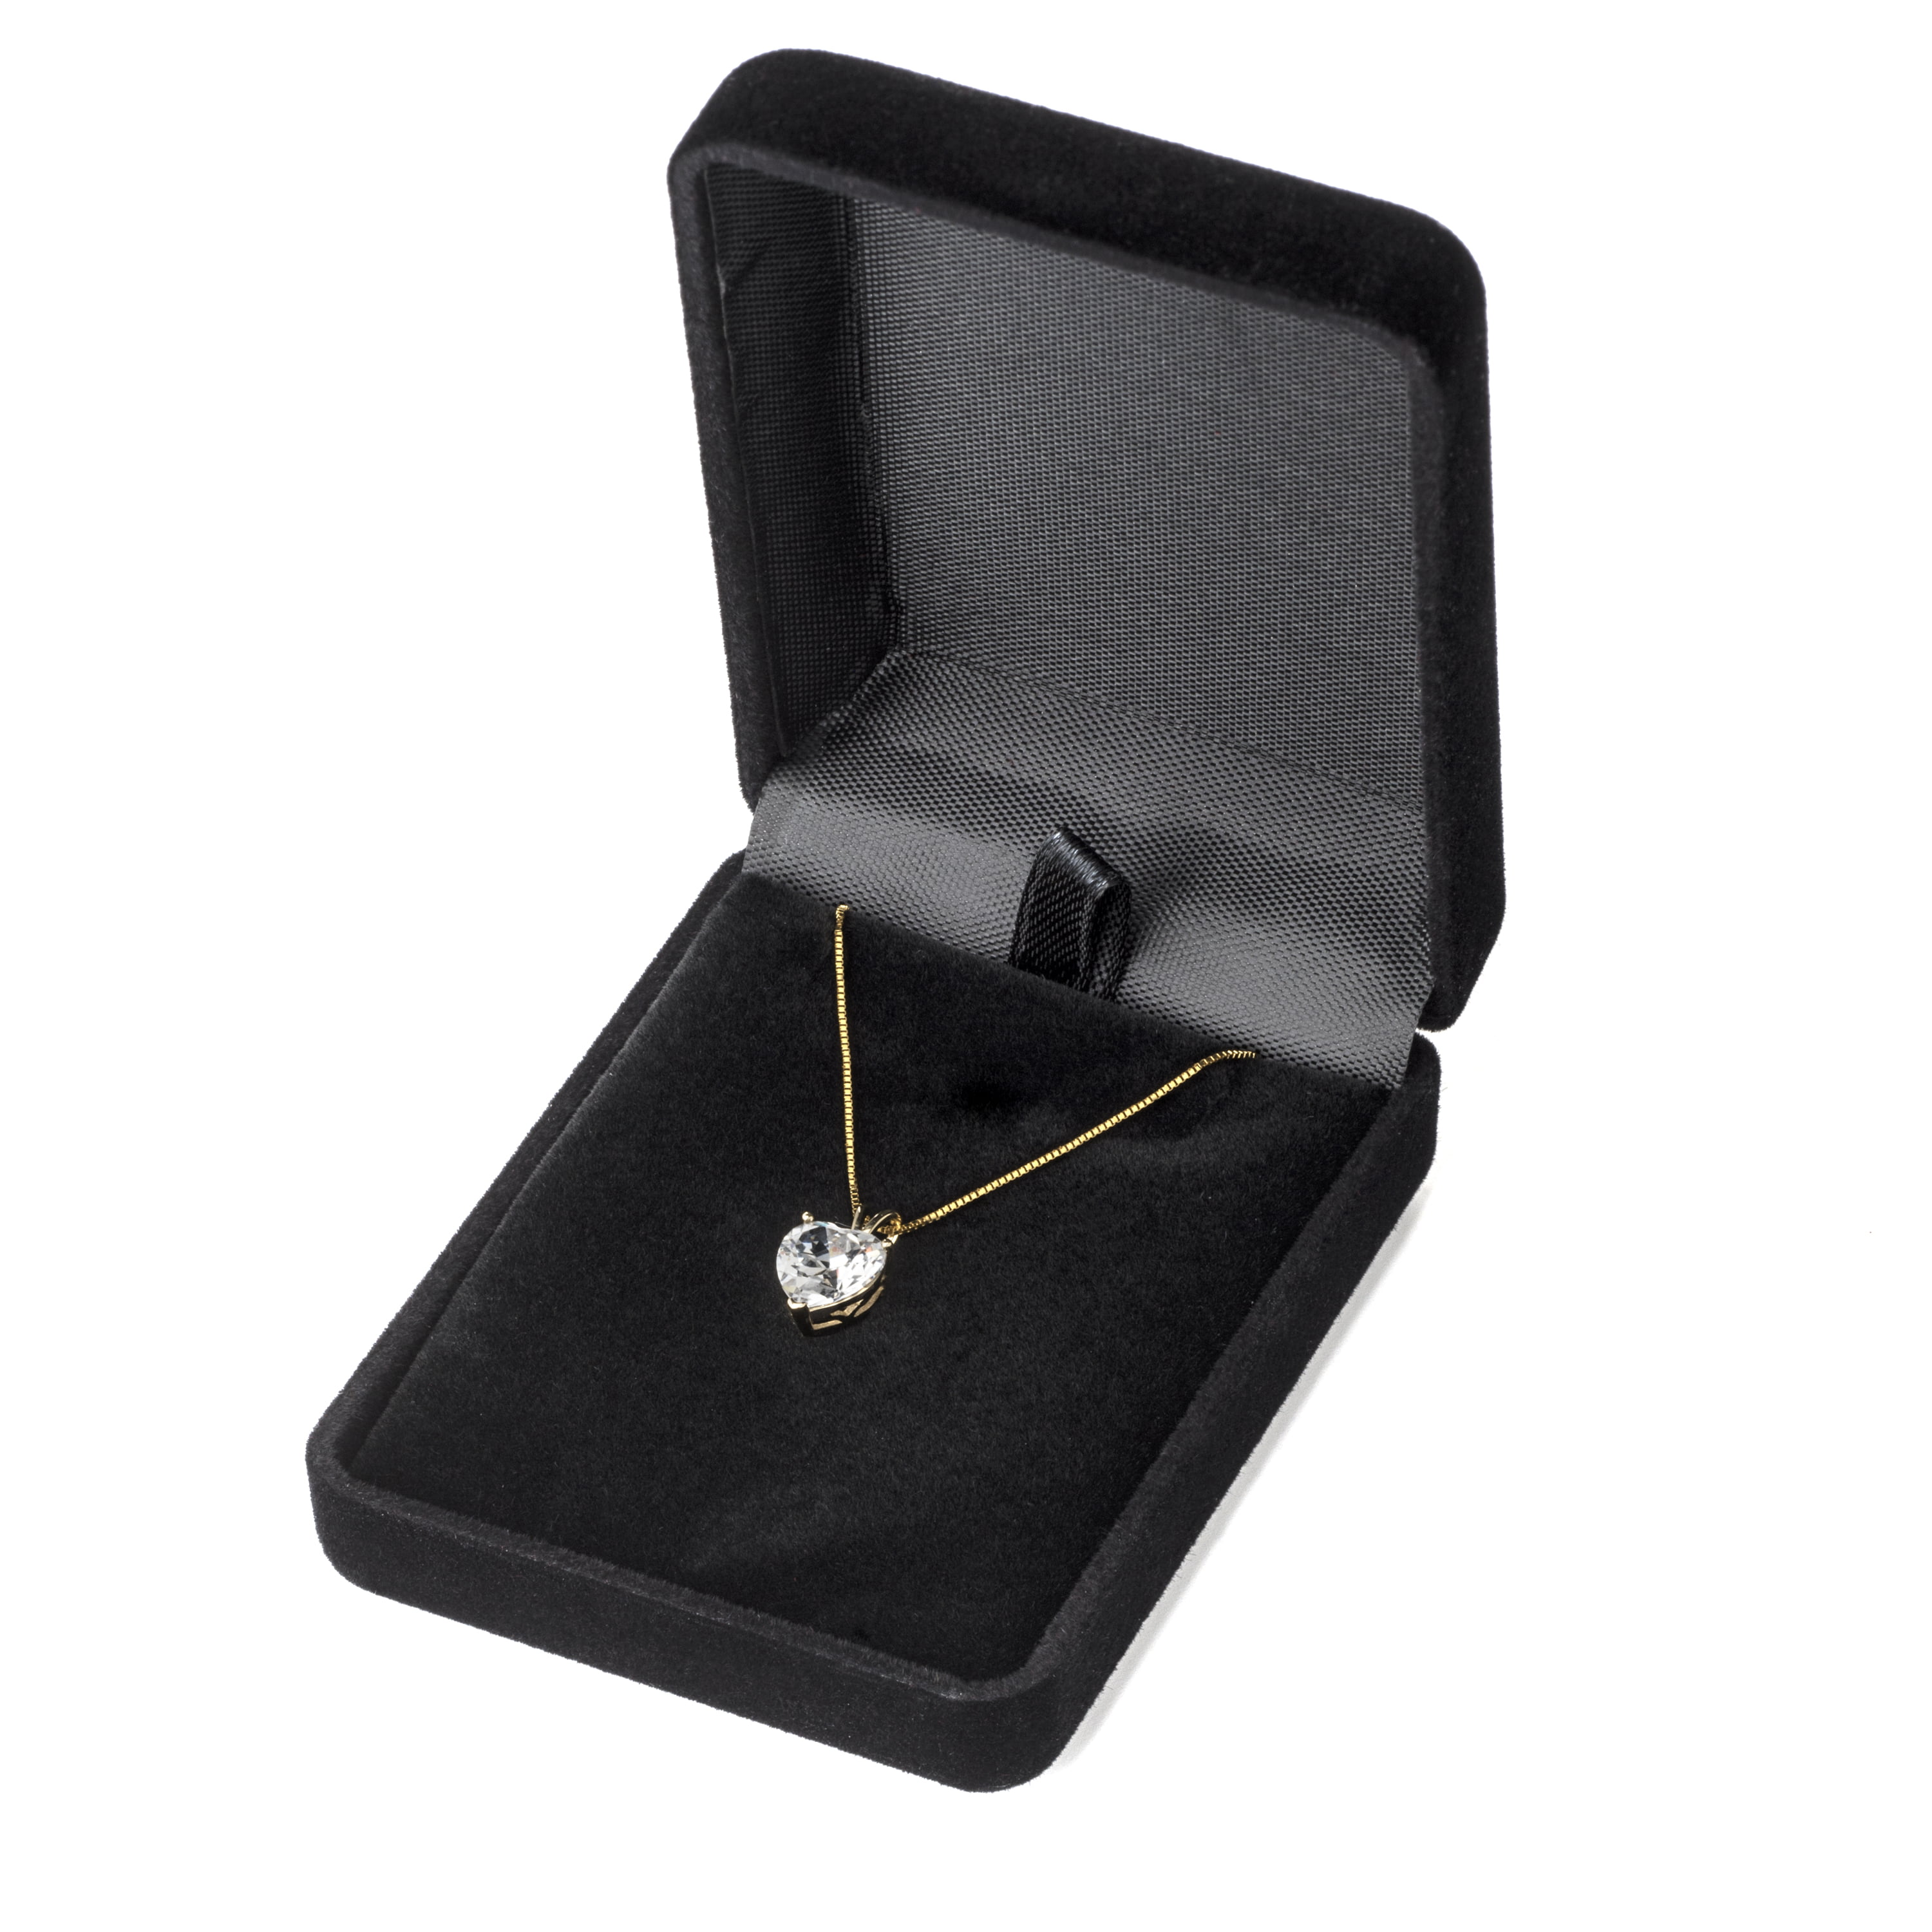 14K Solid Yellow Gold Pendant Necklace 2.0 Carat With Gift Box 18 Inch .60mm Box Link Chain Round Cut Cubic Zirconia Solitaire